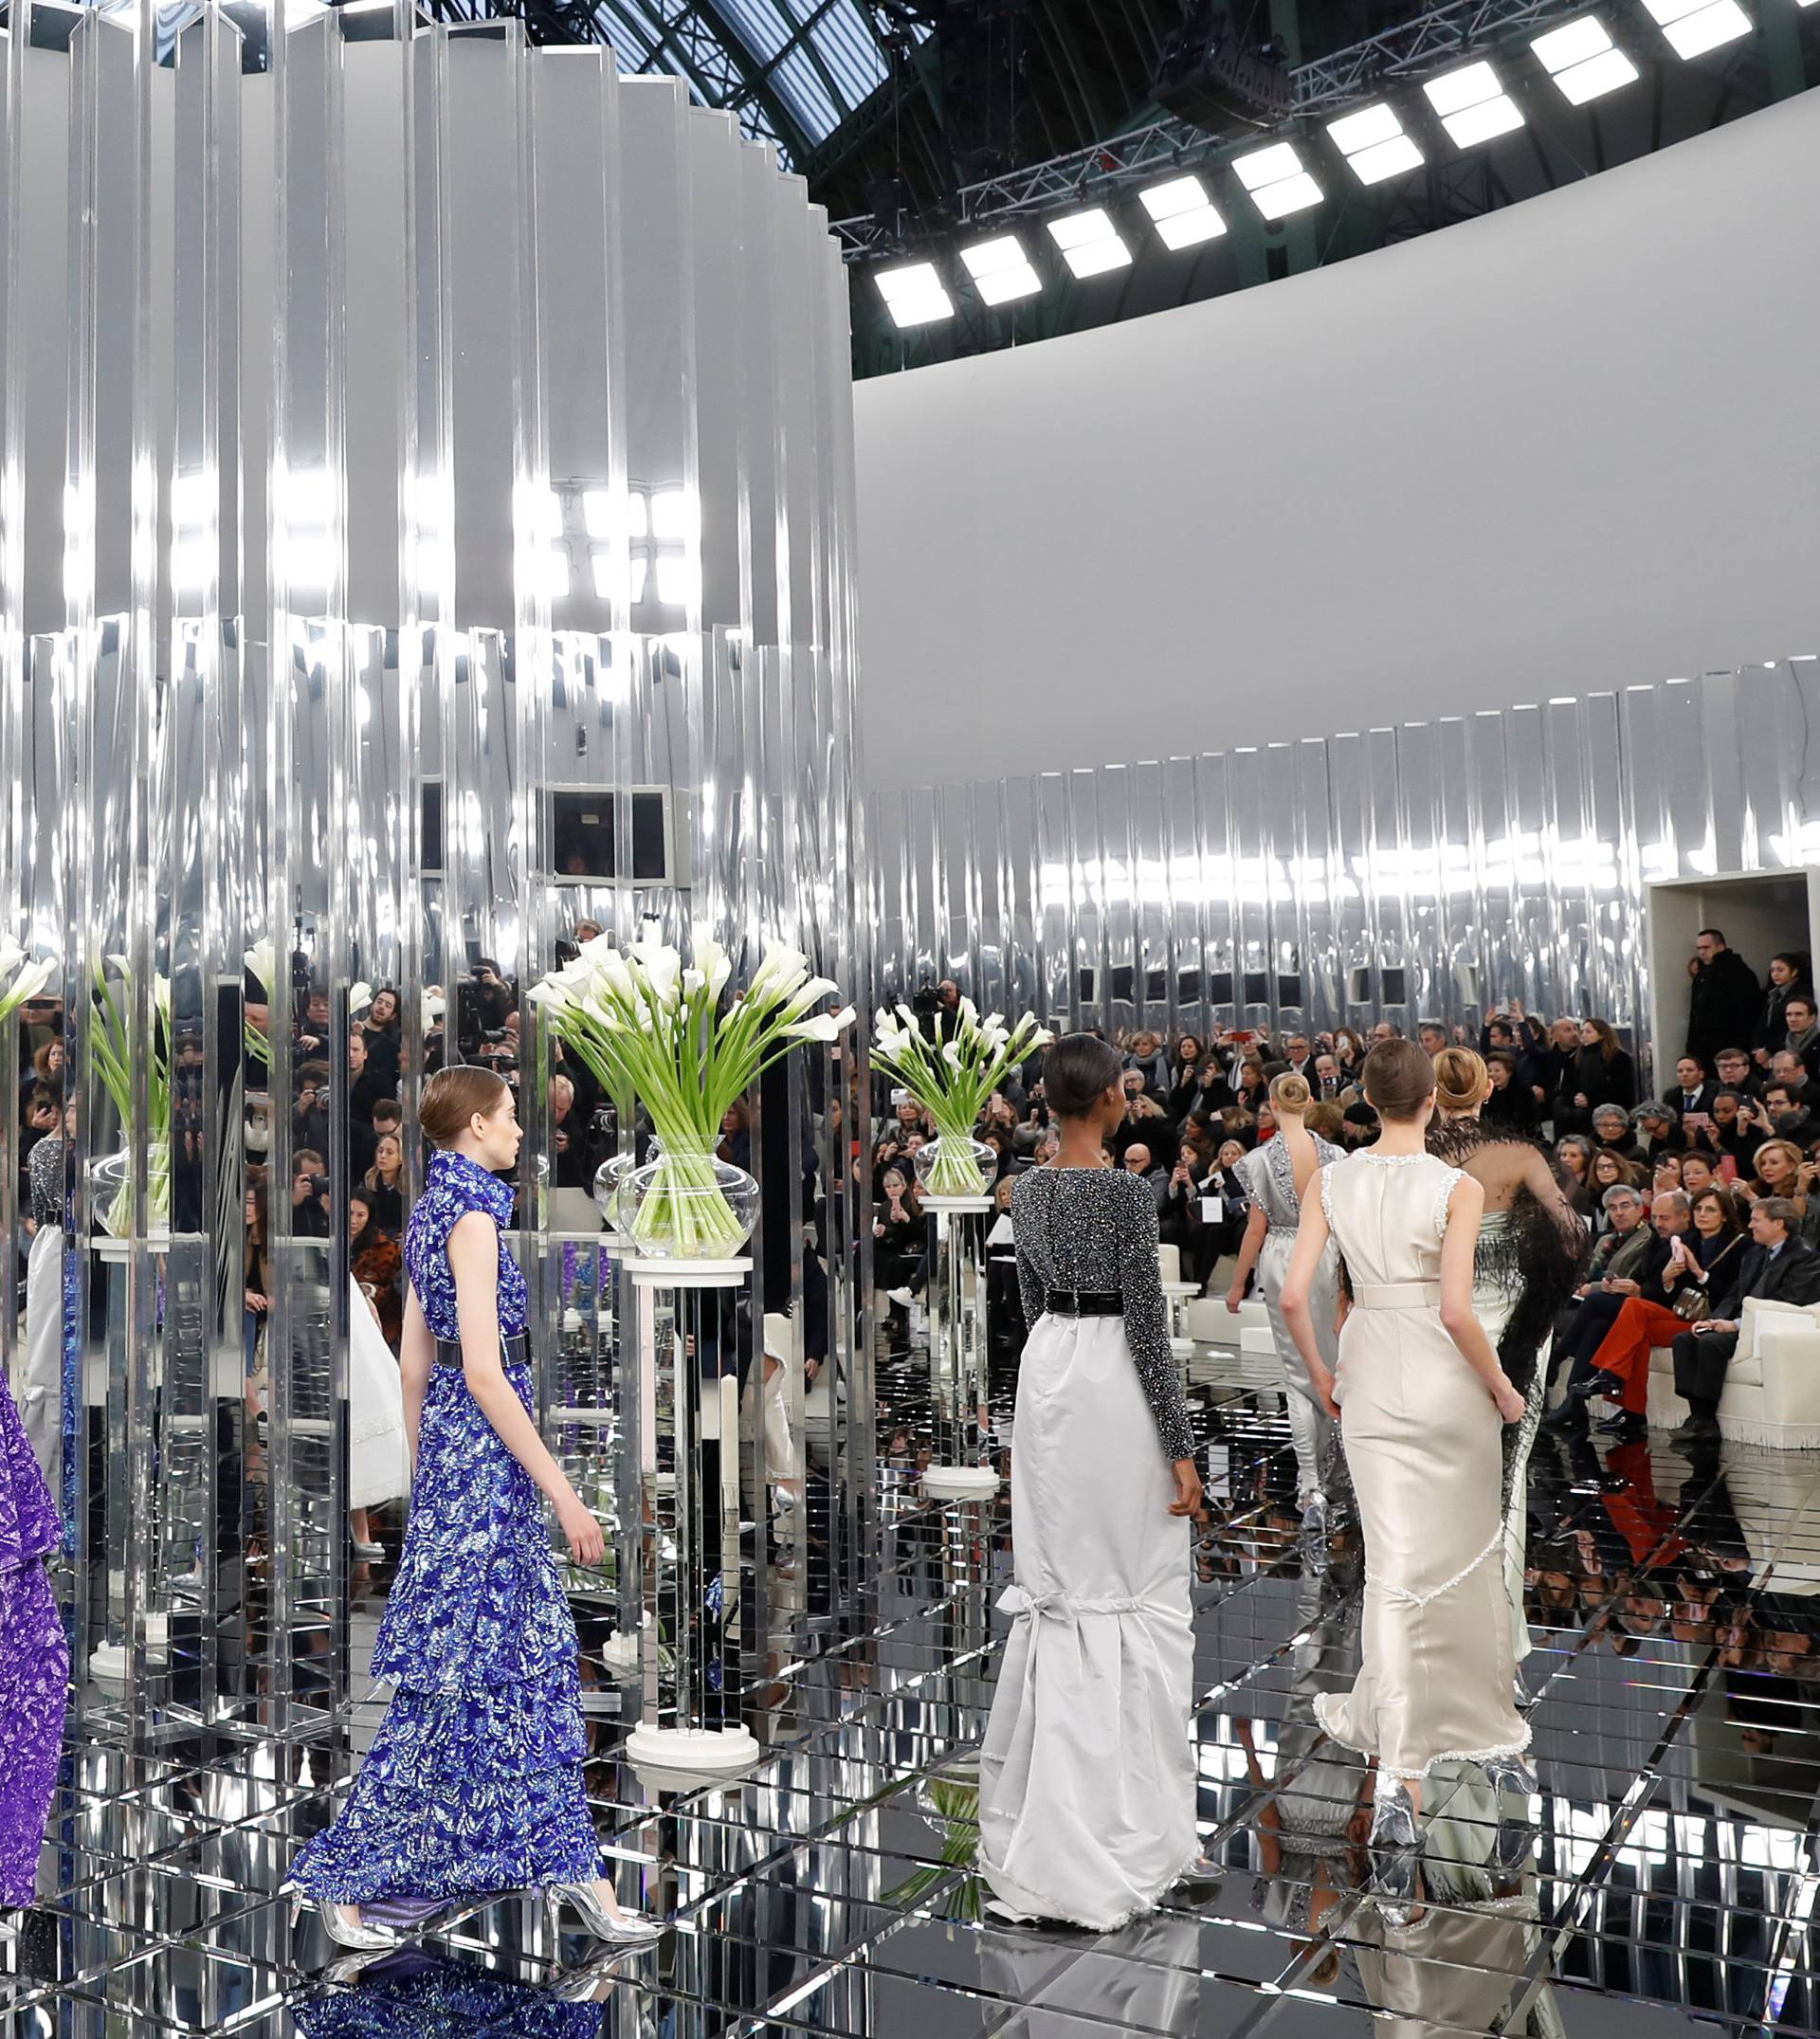 Models present creations by German designer Karl Lagerfeld as part of his Haute Couture Spring/Summer 2017 fashion show for Chanel in Paris